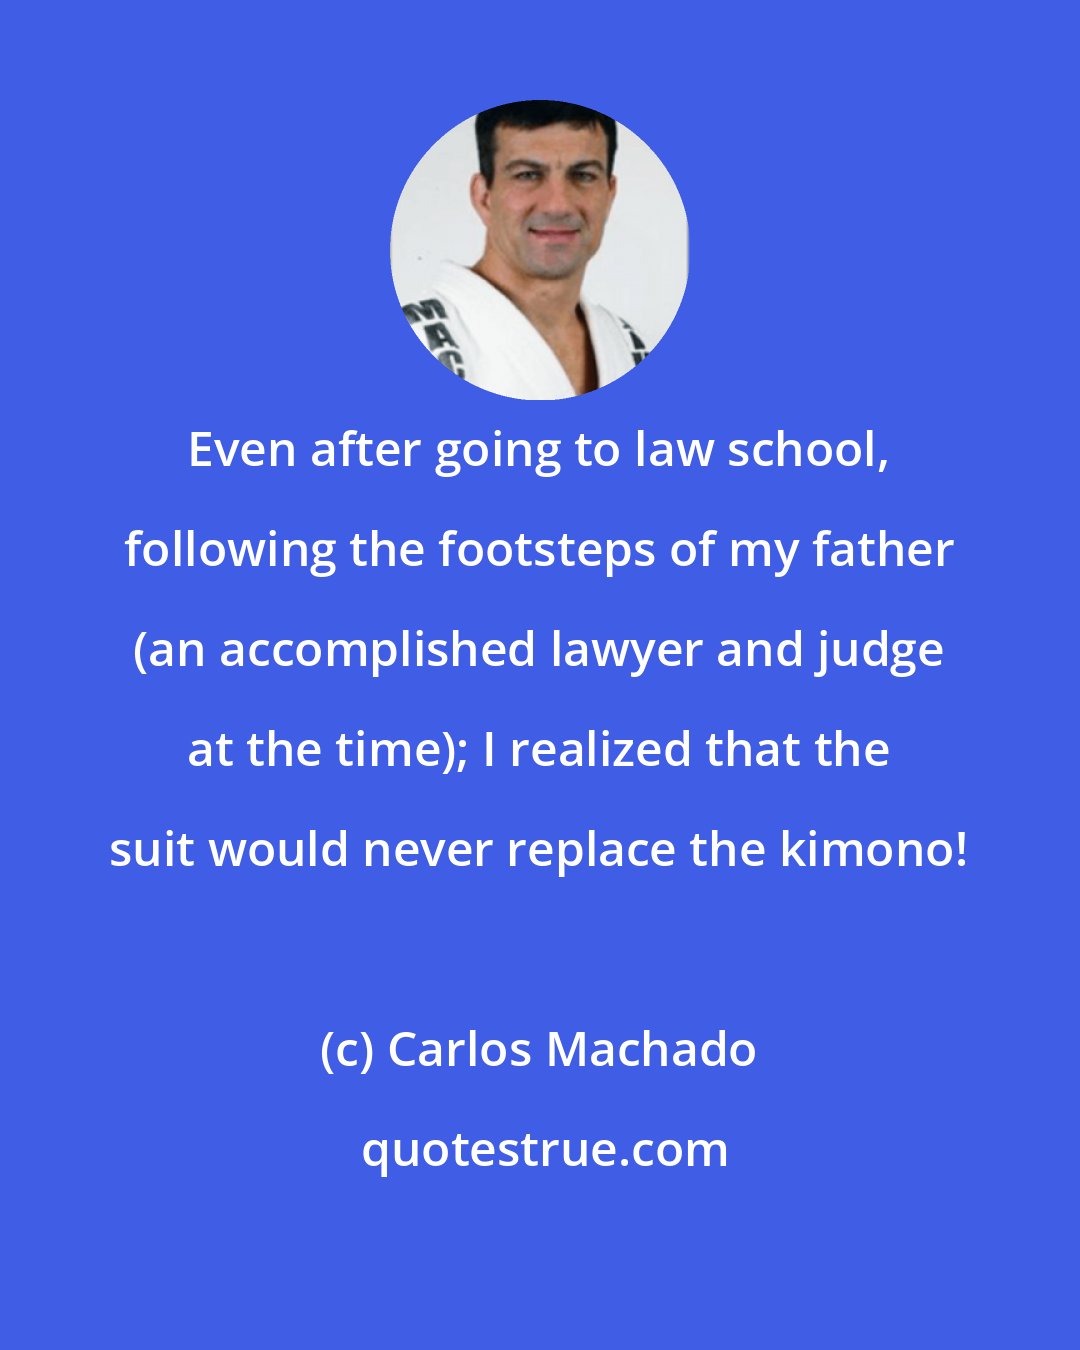 Carlos Machado: Even after going to law school, following the footsteps of my father (an accomplished lawyer and judge at the time); I realized that the suit would never replace the kimono!